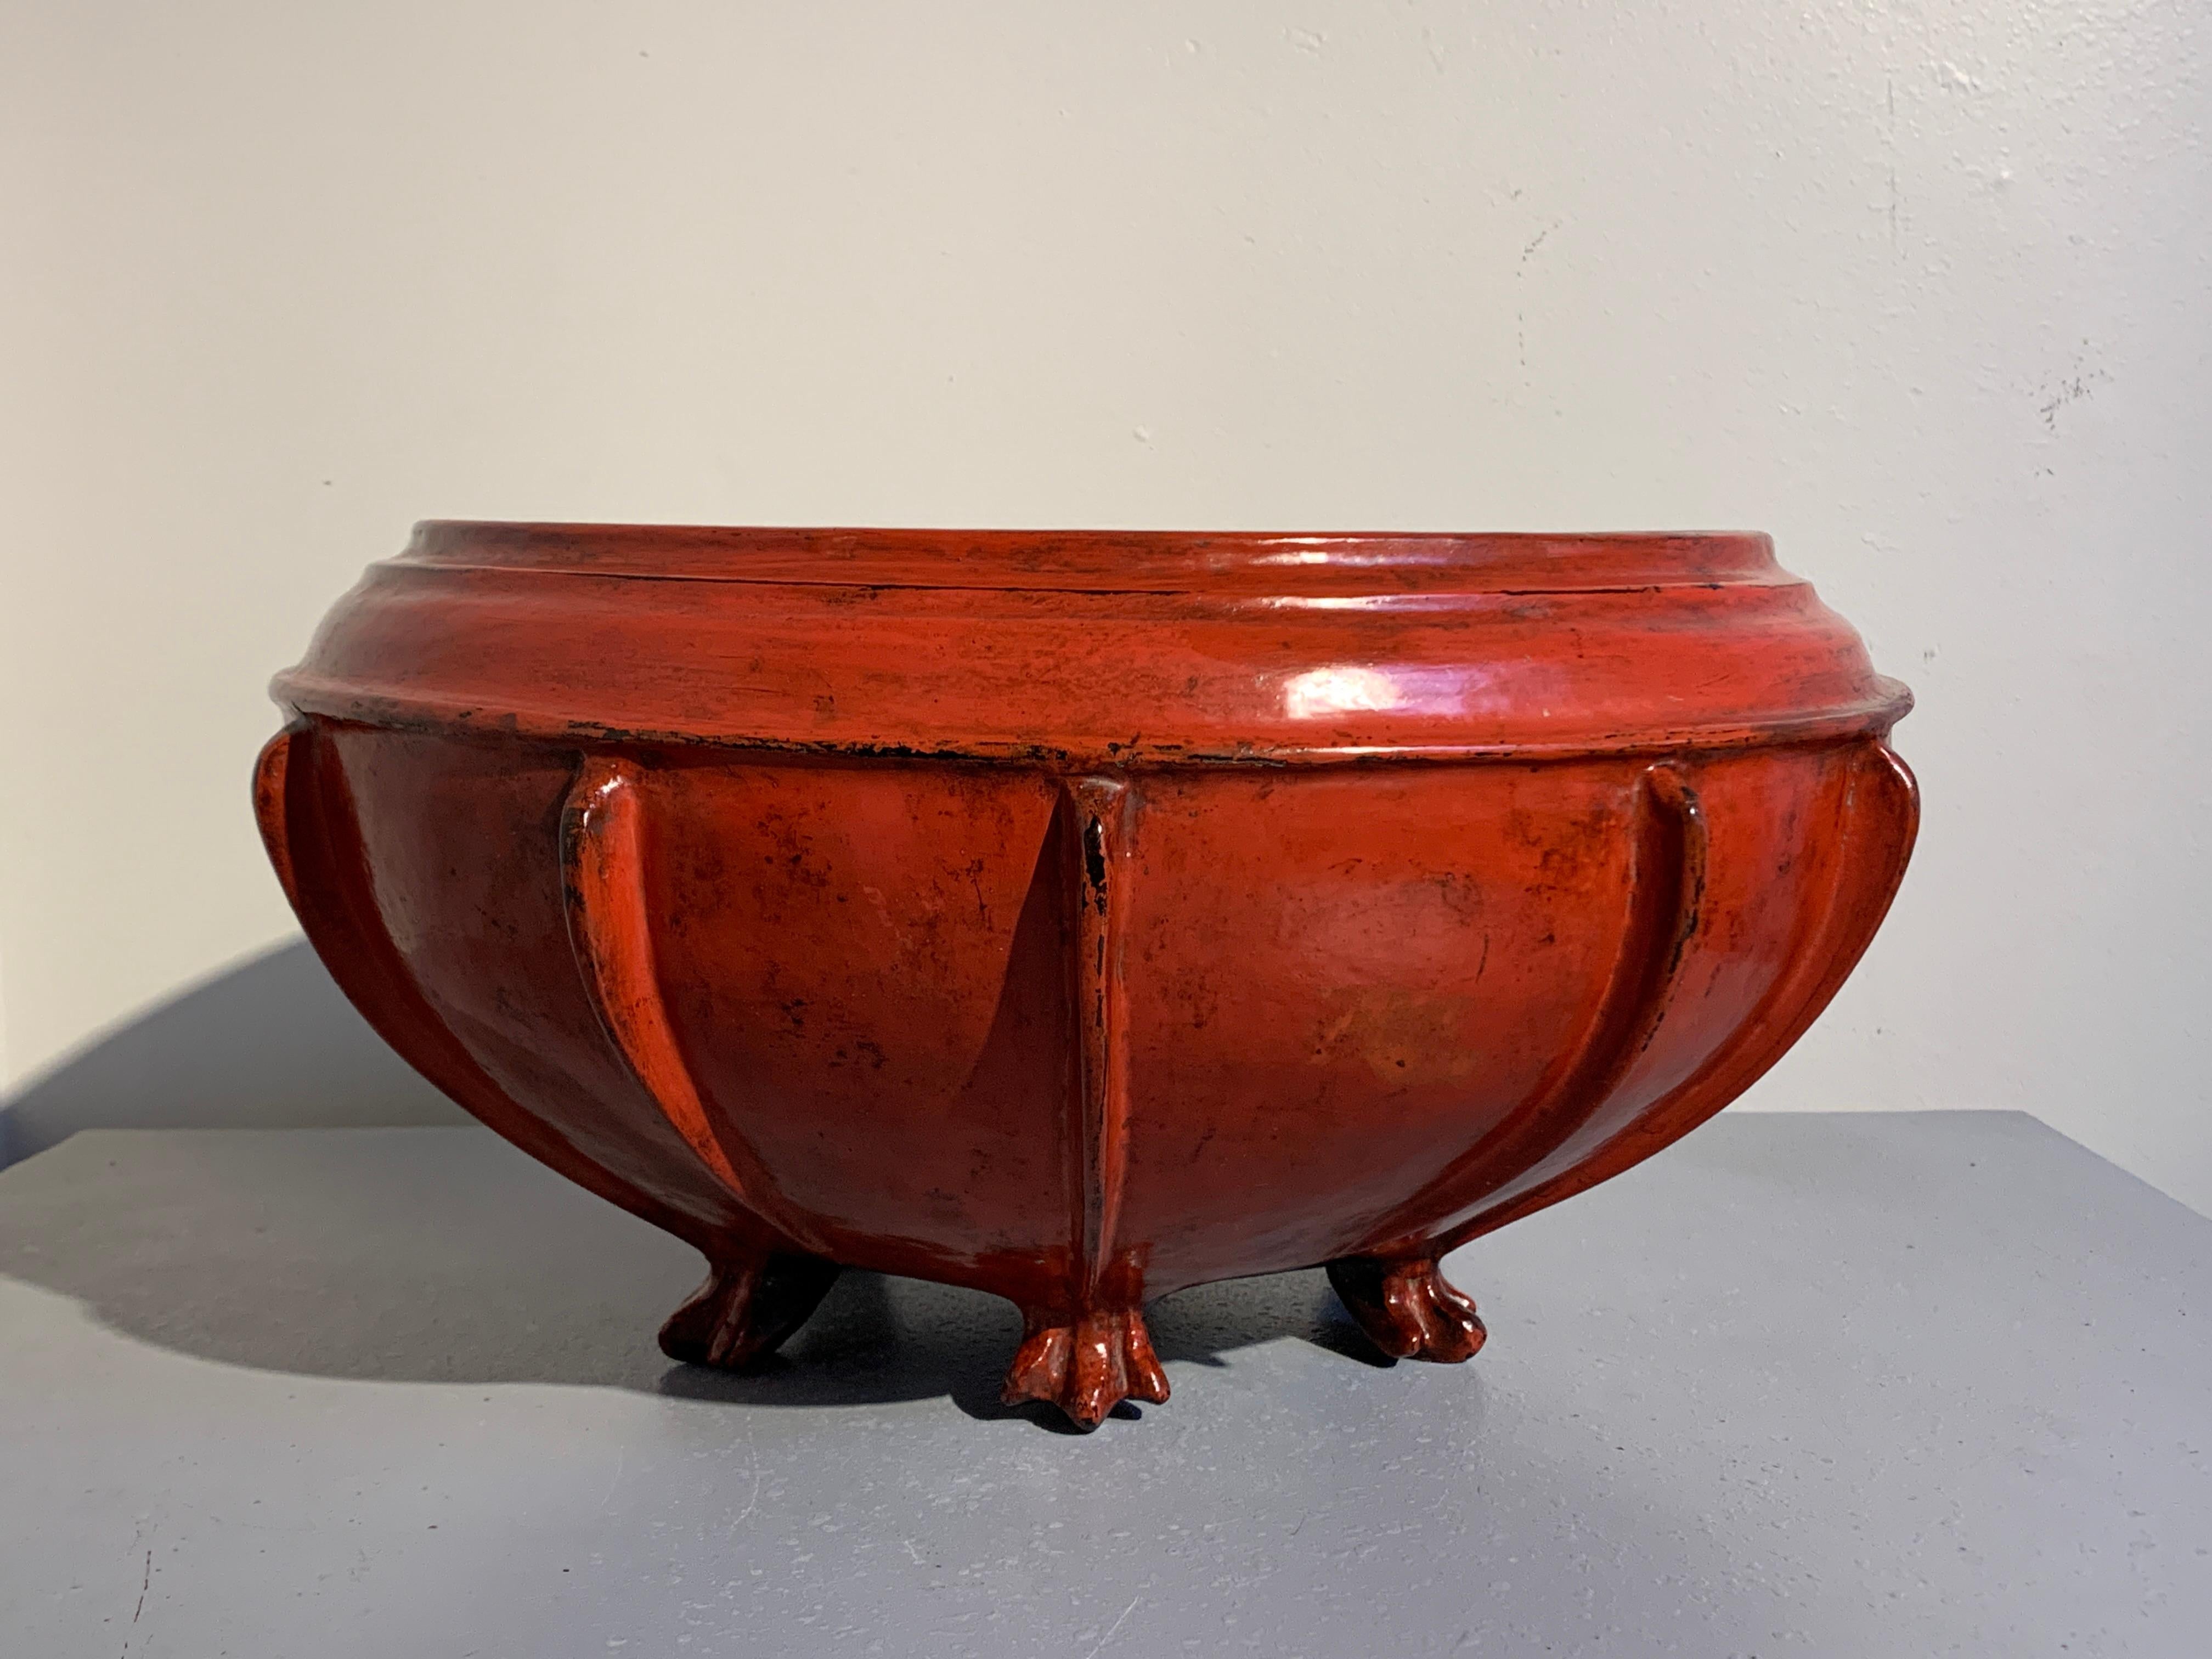 Hand-Woven Large Burmese Red Lacquer Large Offering Bowl, Late 19th or Early 20th Century